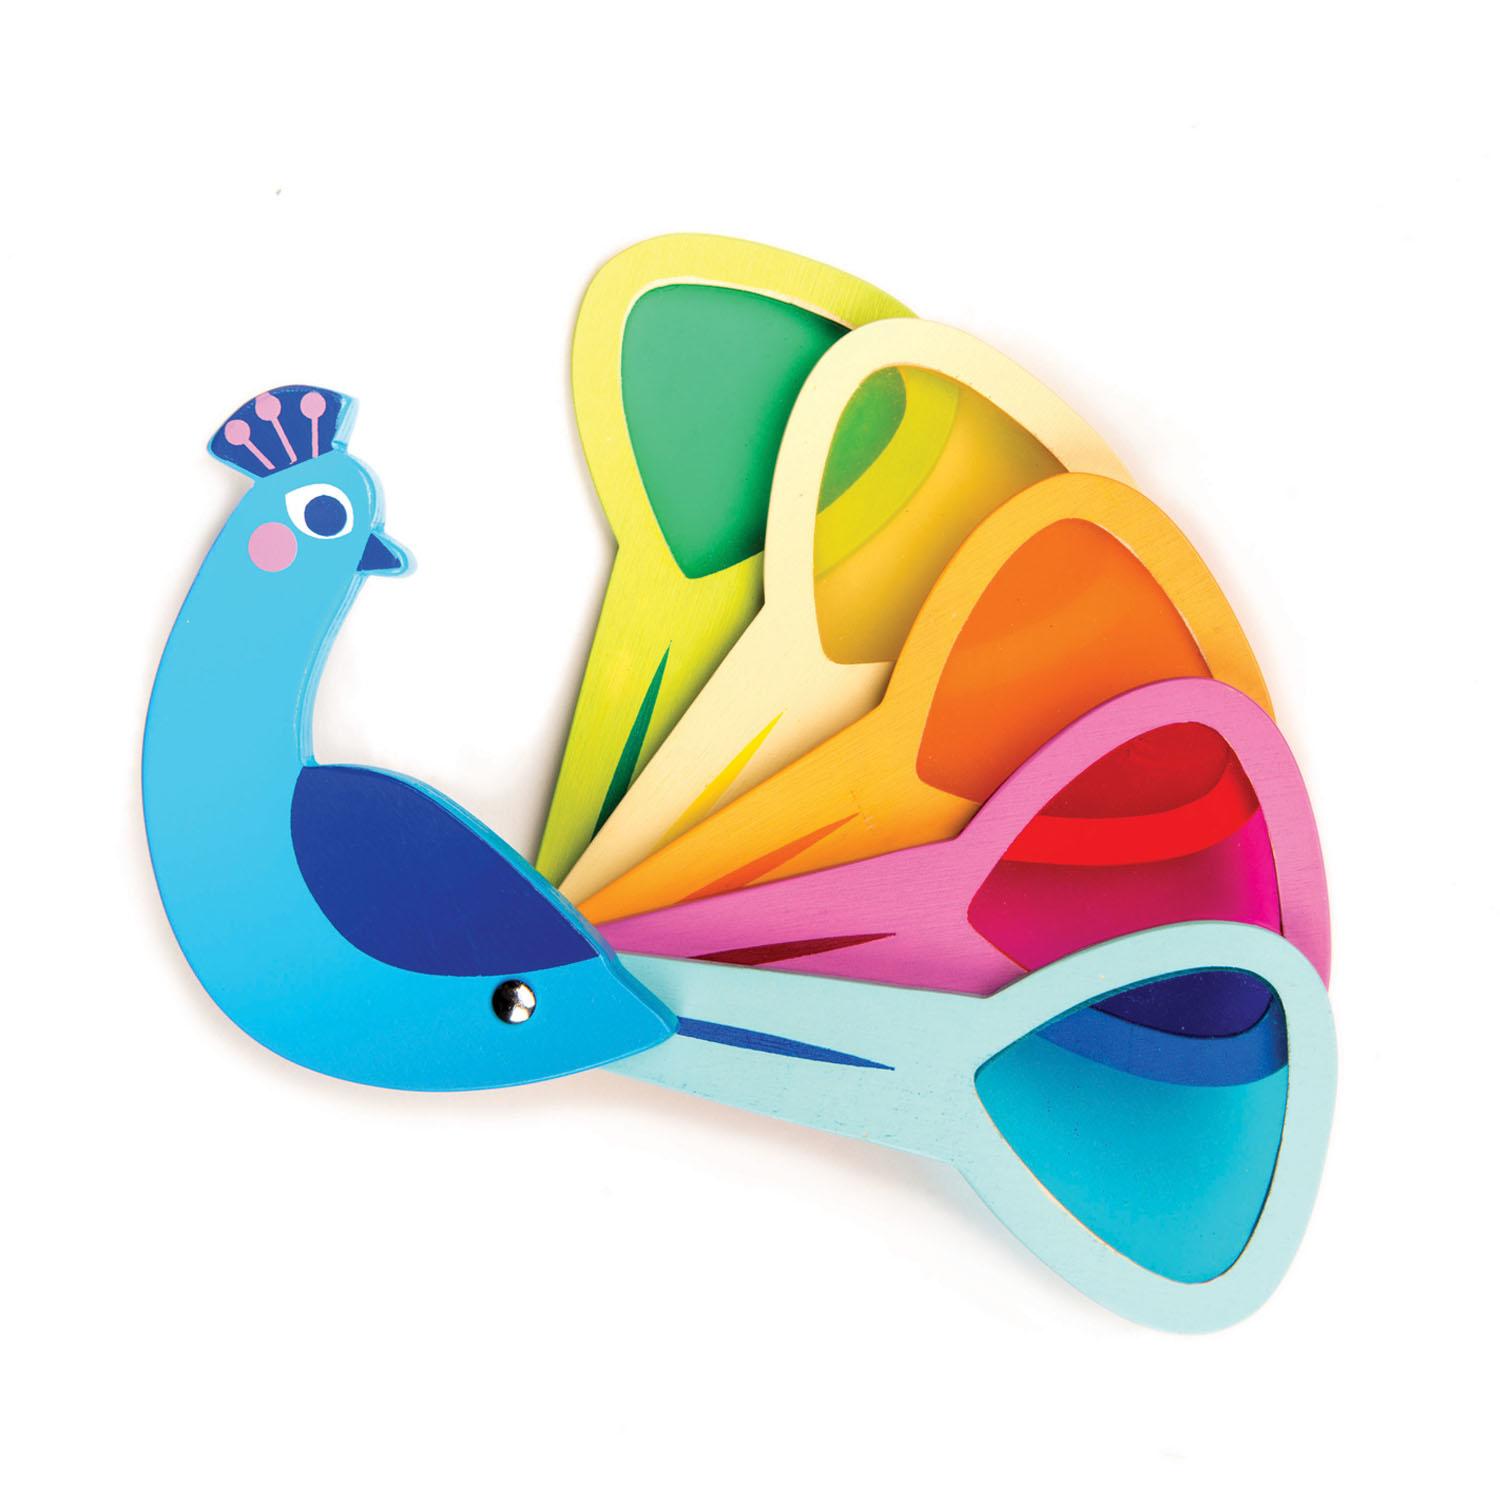 New Wooden Toy Peacock with Acrylic Coloured Tail Feathers #2